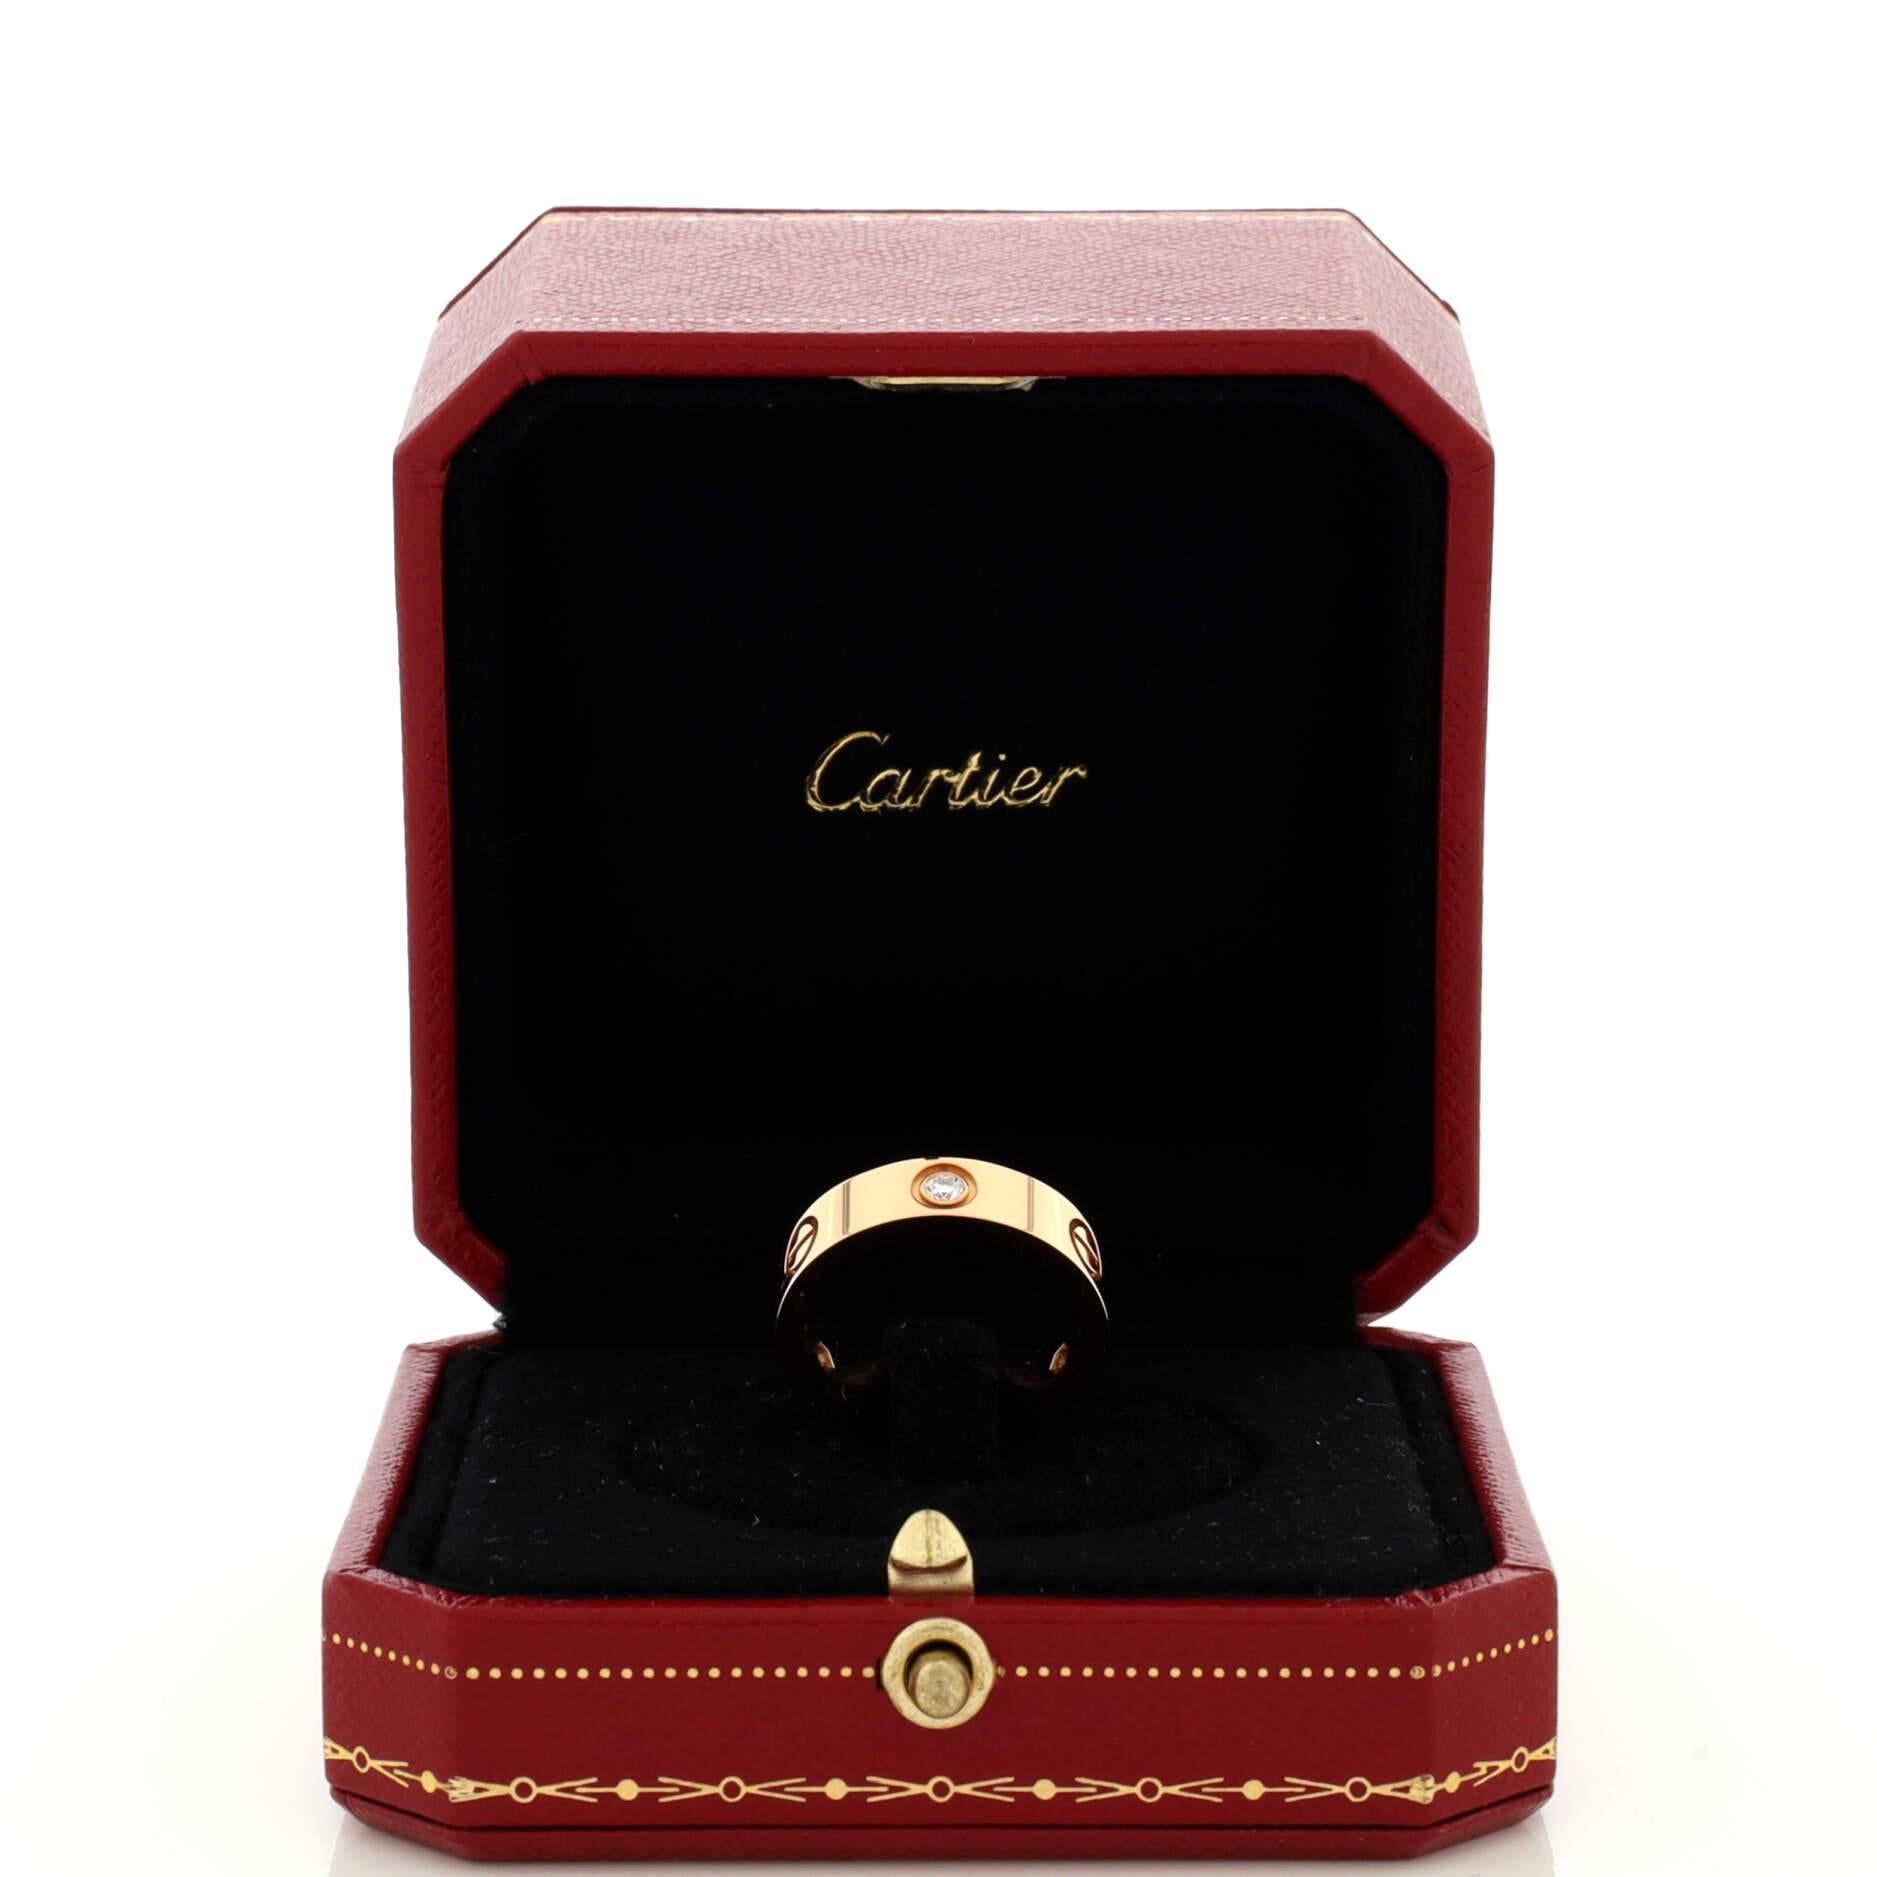 Condition: Excellent. Faint wear throughout.
Accessories: No Accessories
Measurements: Size: 7.25 - 55, Width: 5.45 mm
Designer: Cartier
Model: Love 3 Diamonds Band Ring 18K Rose Gold with Diamonds
Exterior Color: Rose Gold
Item Number: 215480/59